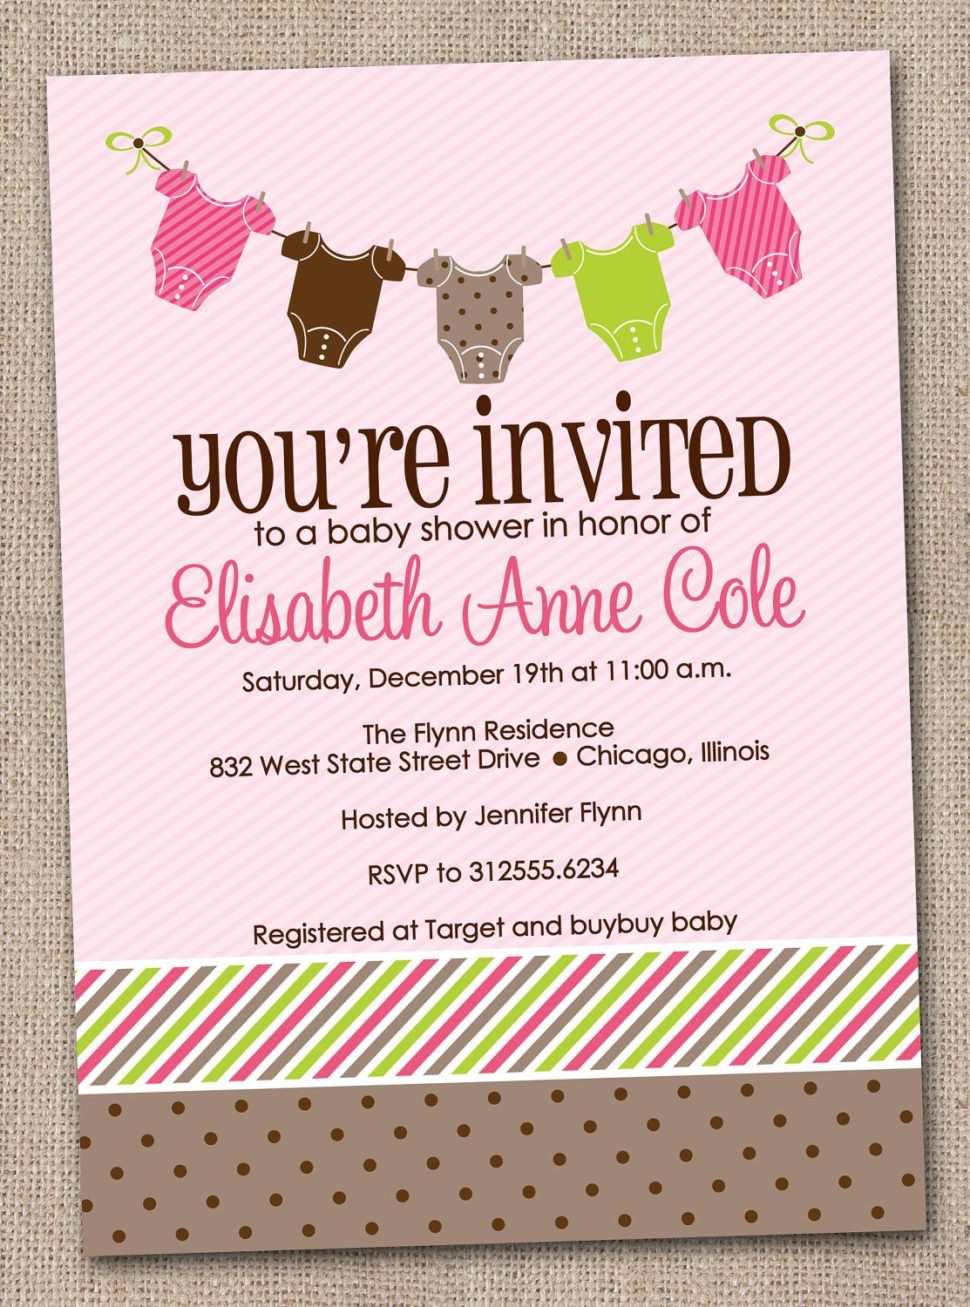 Medium Size of Baby Shower:graceful Baby Shower Cards Image Designs Baby Shower Games With Owl Baby Shower Invitations Plus Baby Shower Quilt Together With Couples Baby Shower As Well As Baby Shower Products